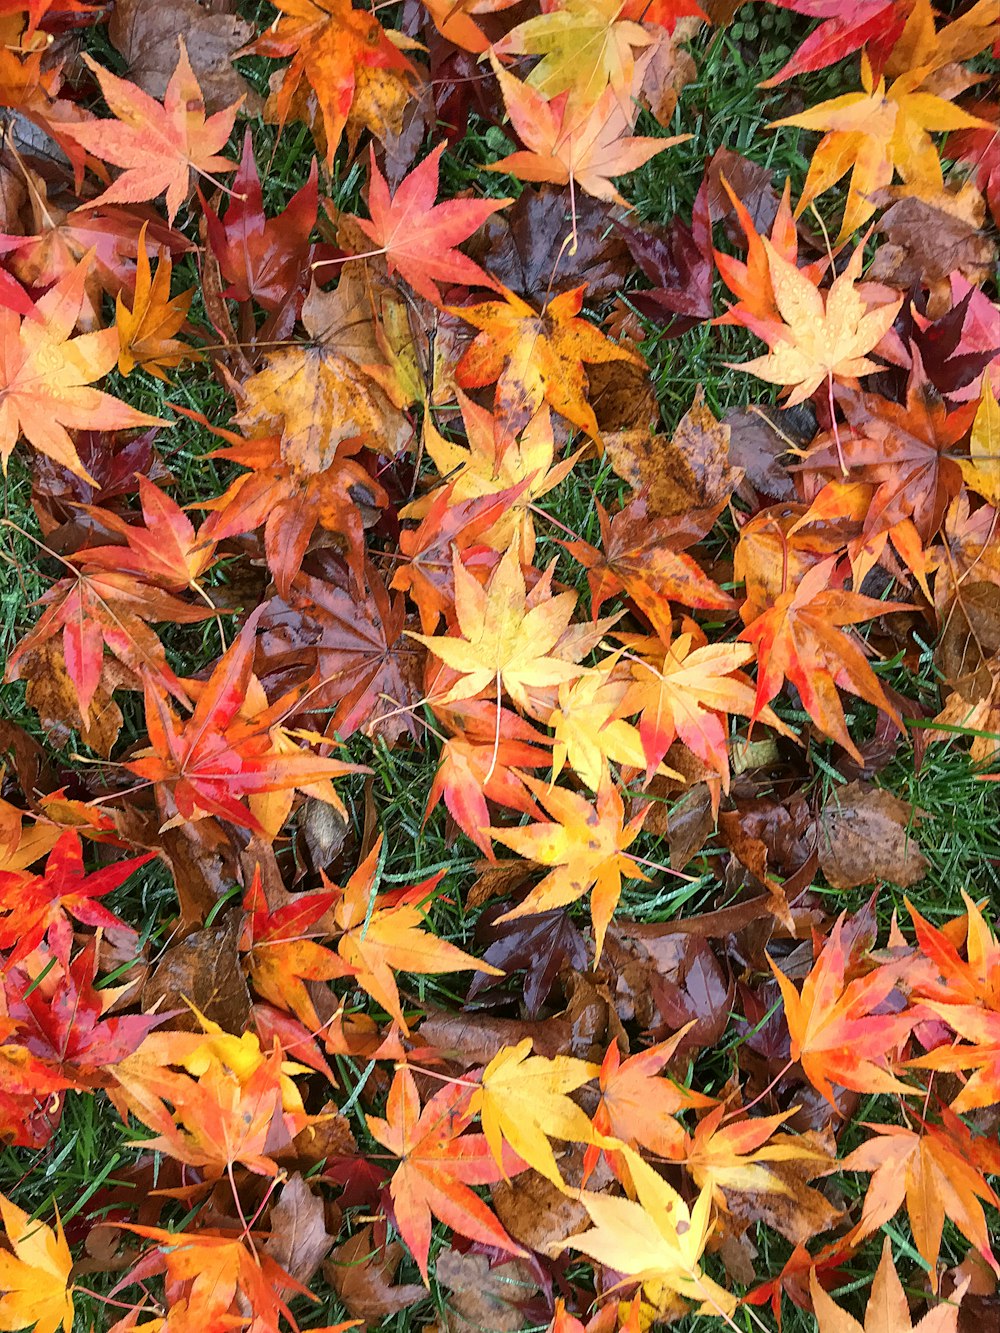 orange-and-red maple leaves